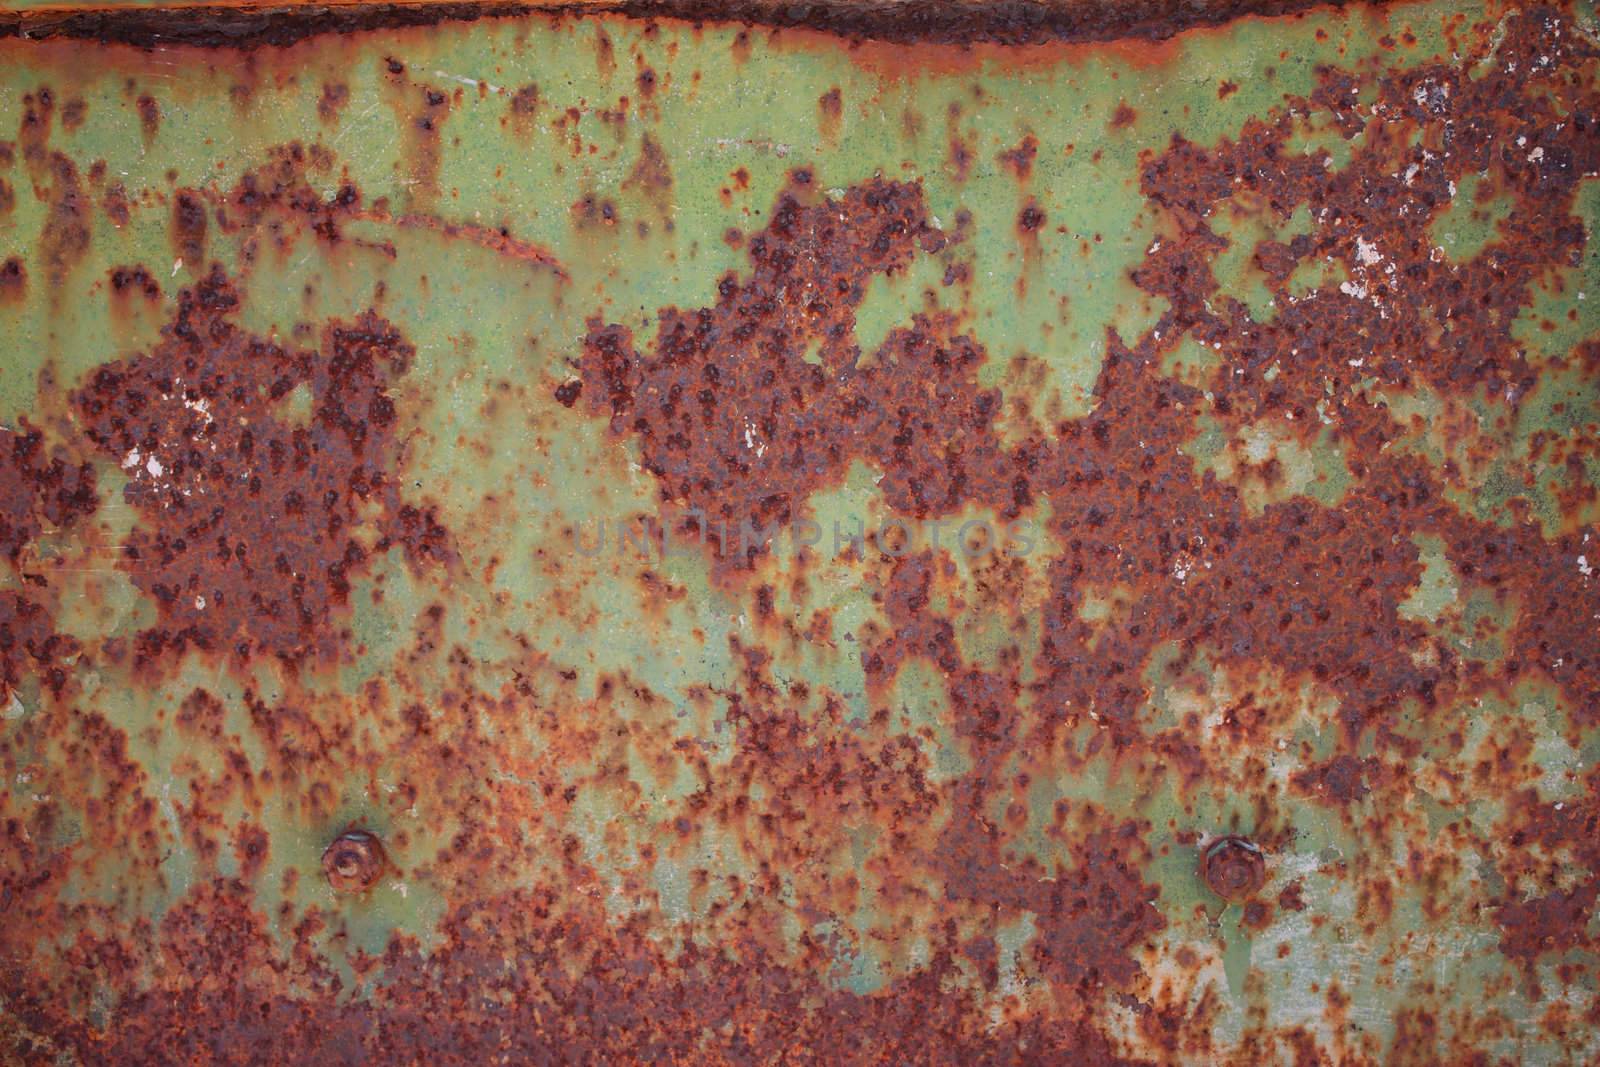 Rusty painted metal with paint pilling off